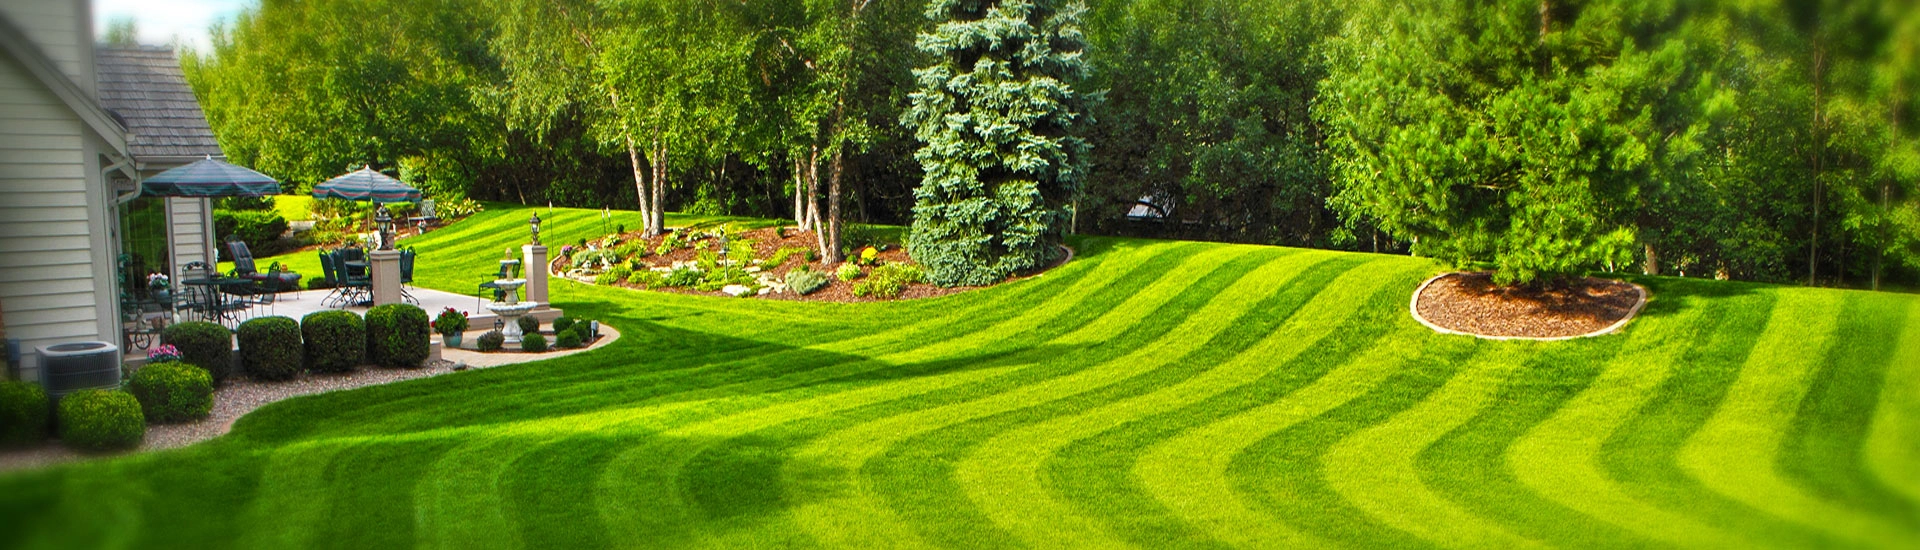 photo of perfectly manicured backyard after using lawn care software